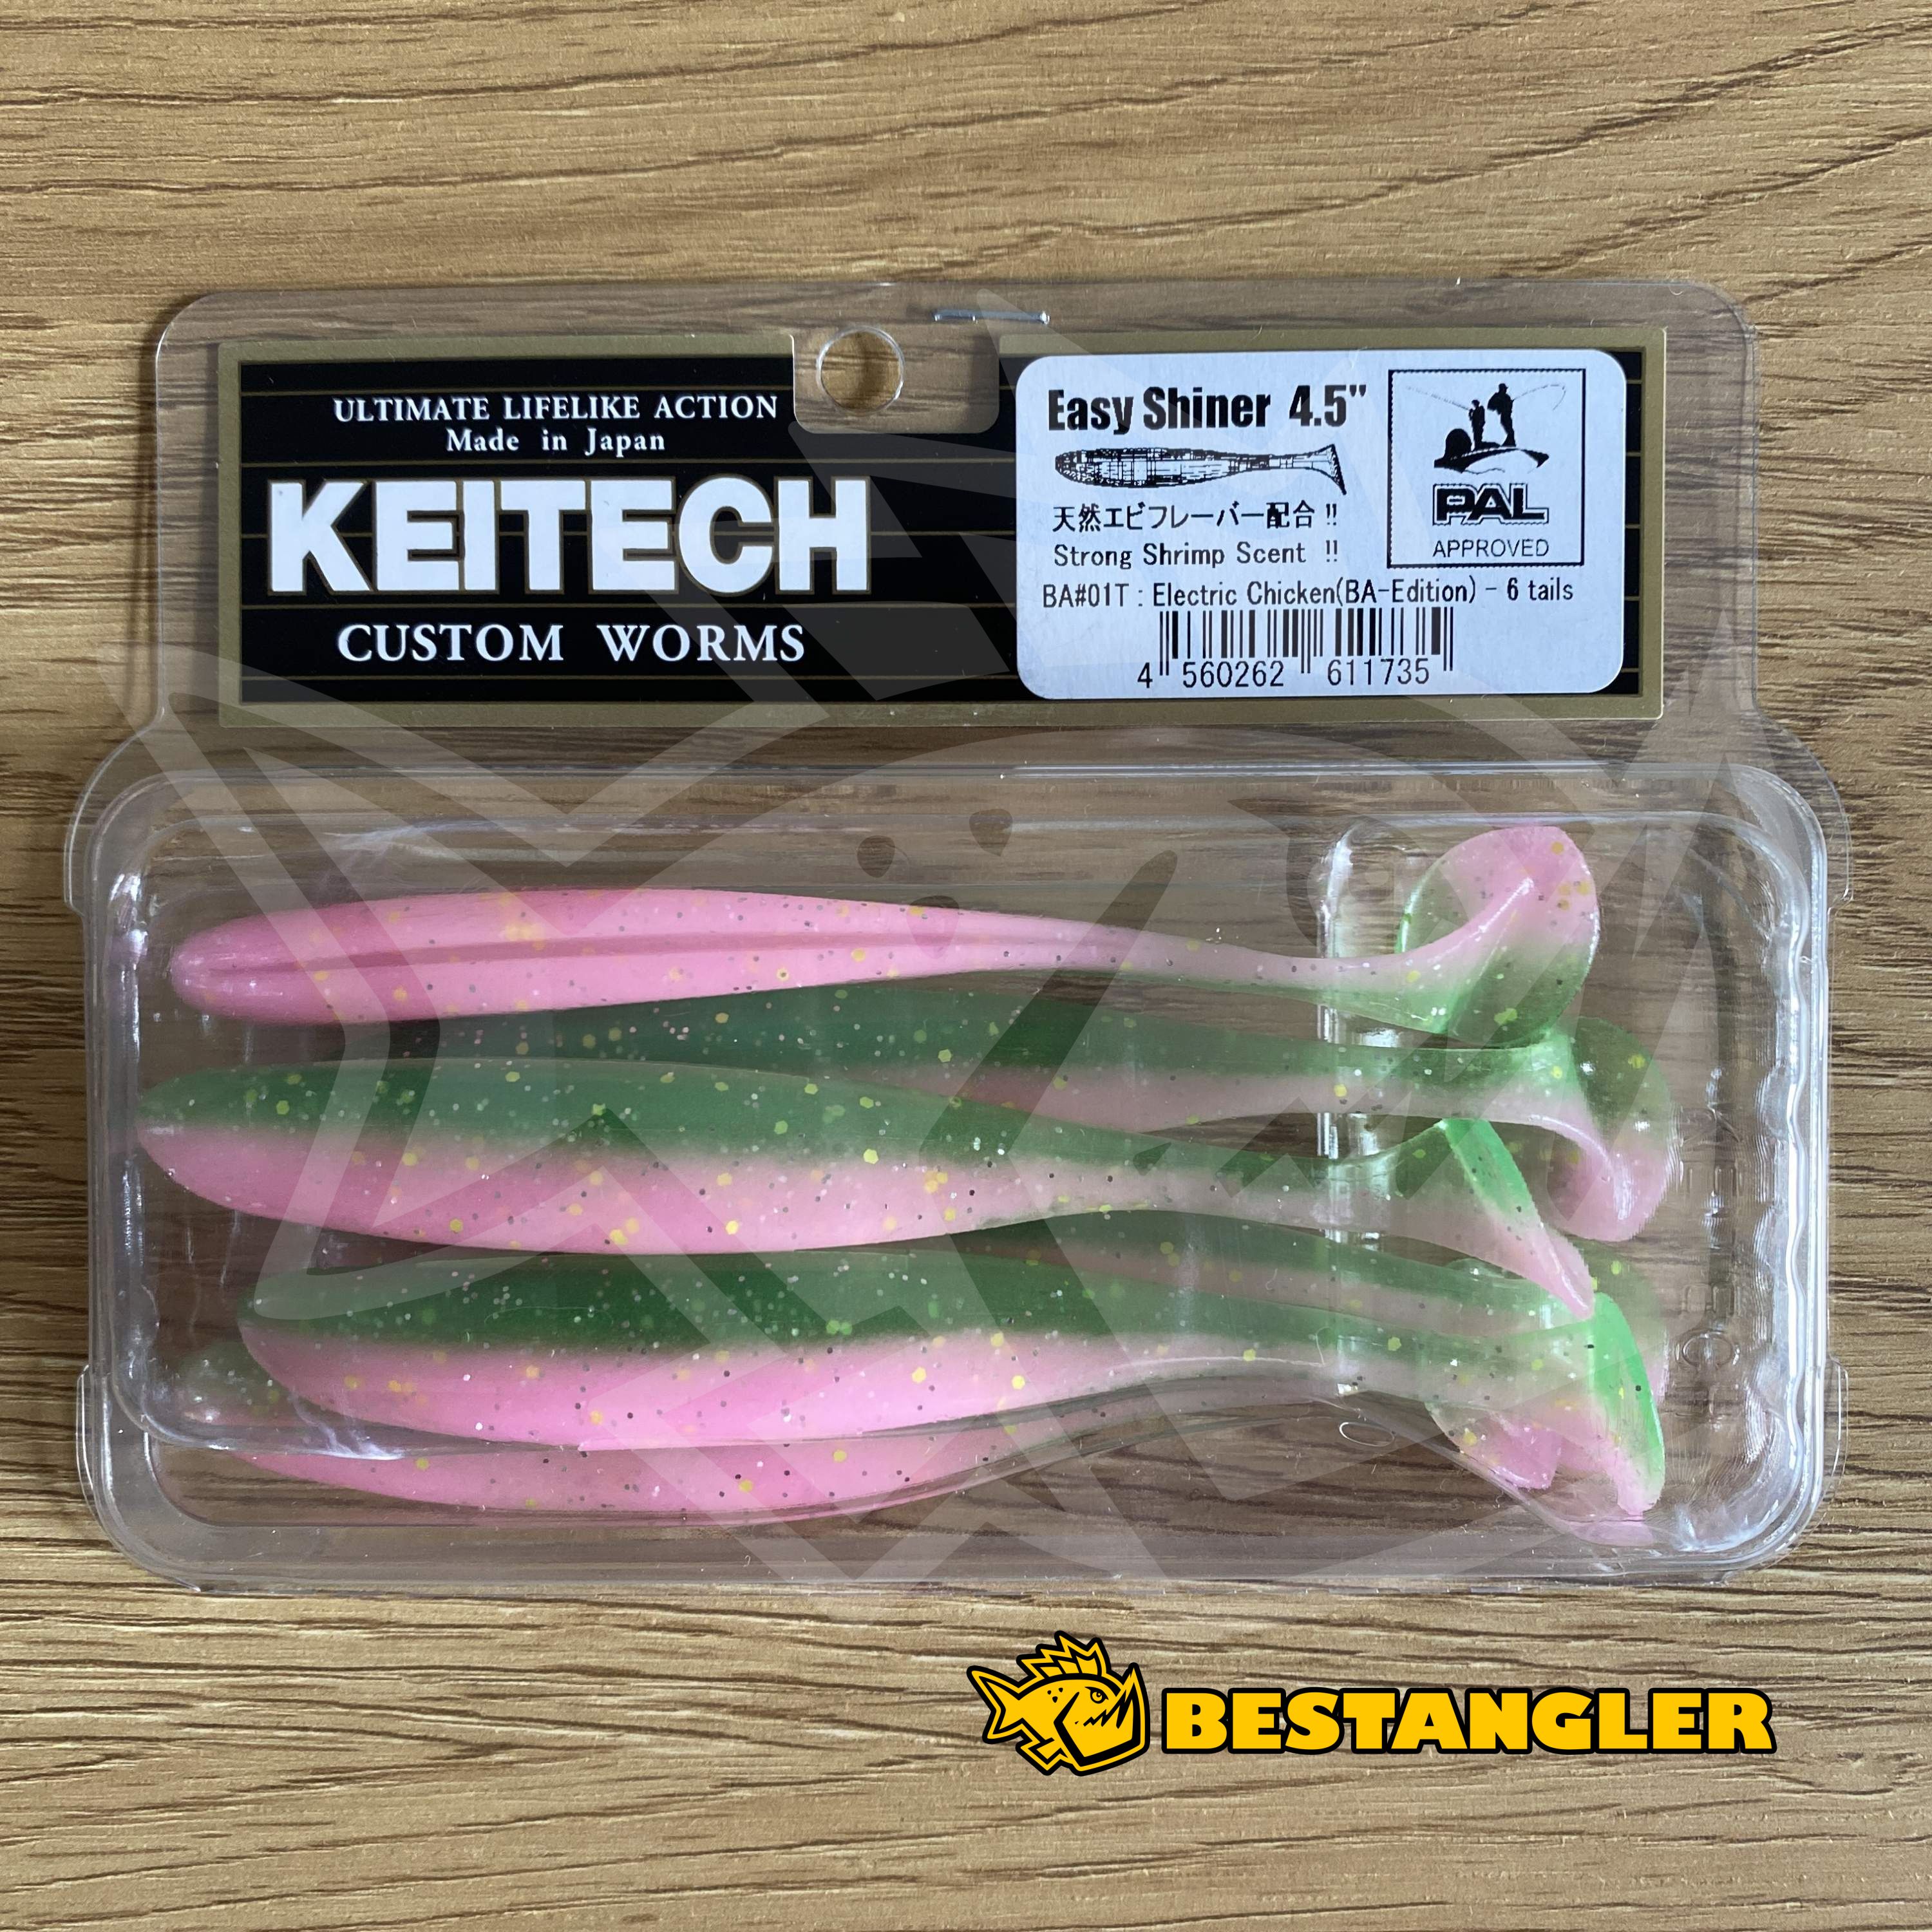 Keitech Easy Shiner 4.5 Electric Chicken